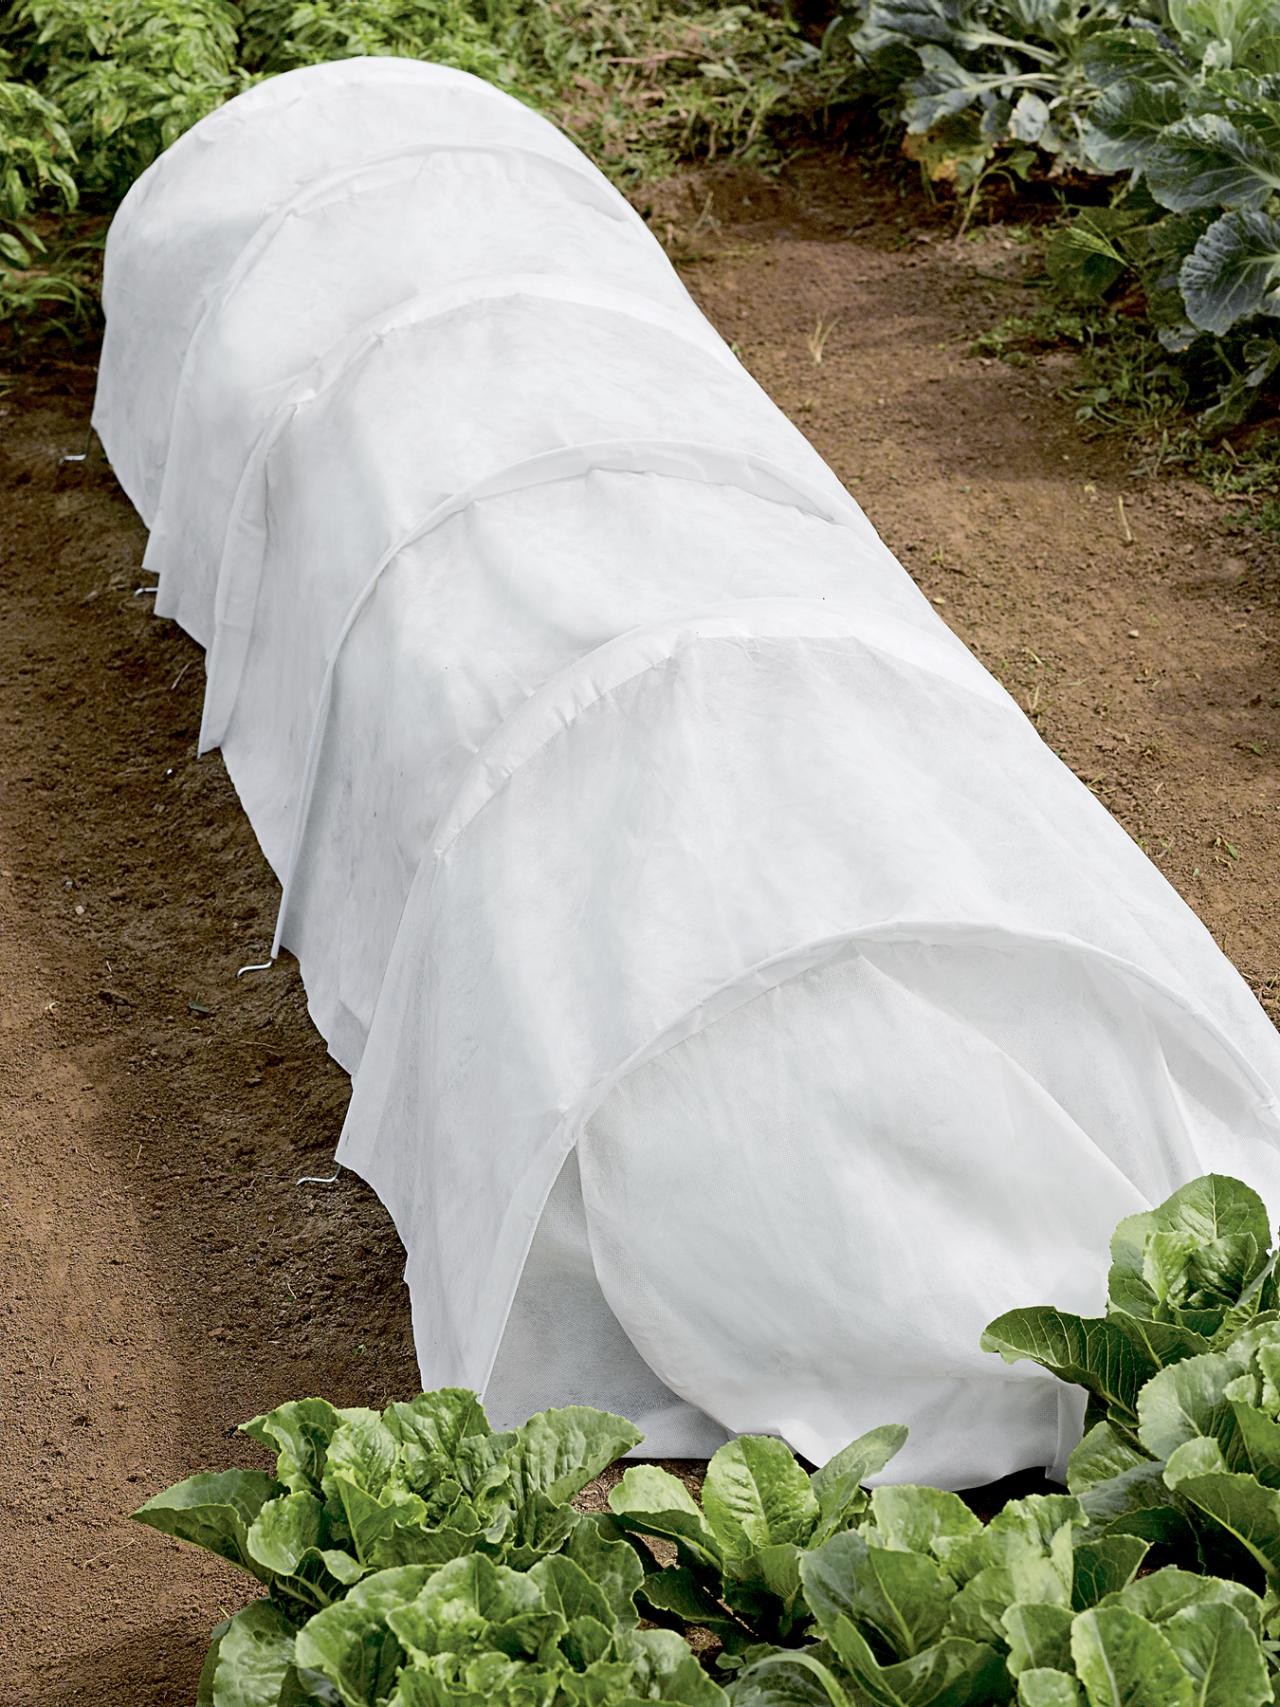 Protect Plants With Row Covers Hgtv